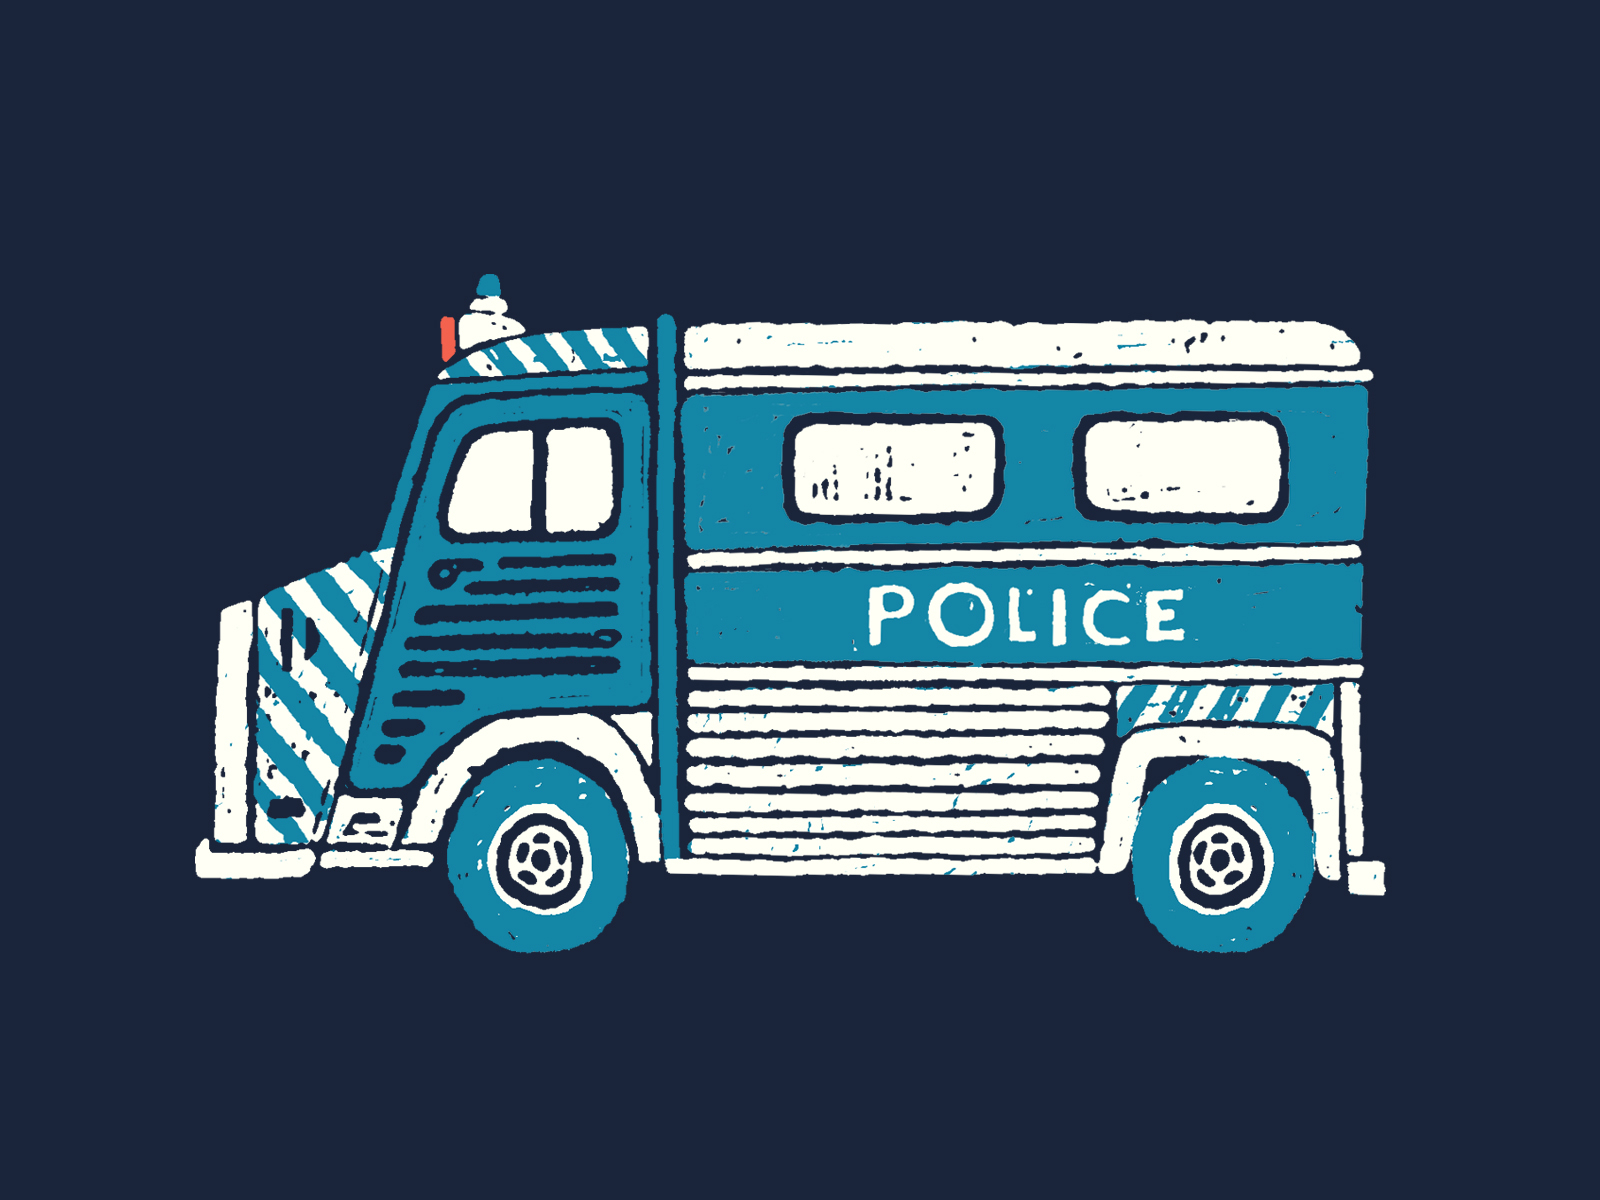 Police Van - The French Dispatch dispatch film french illustration movie police truck van wes anderson